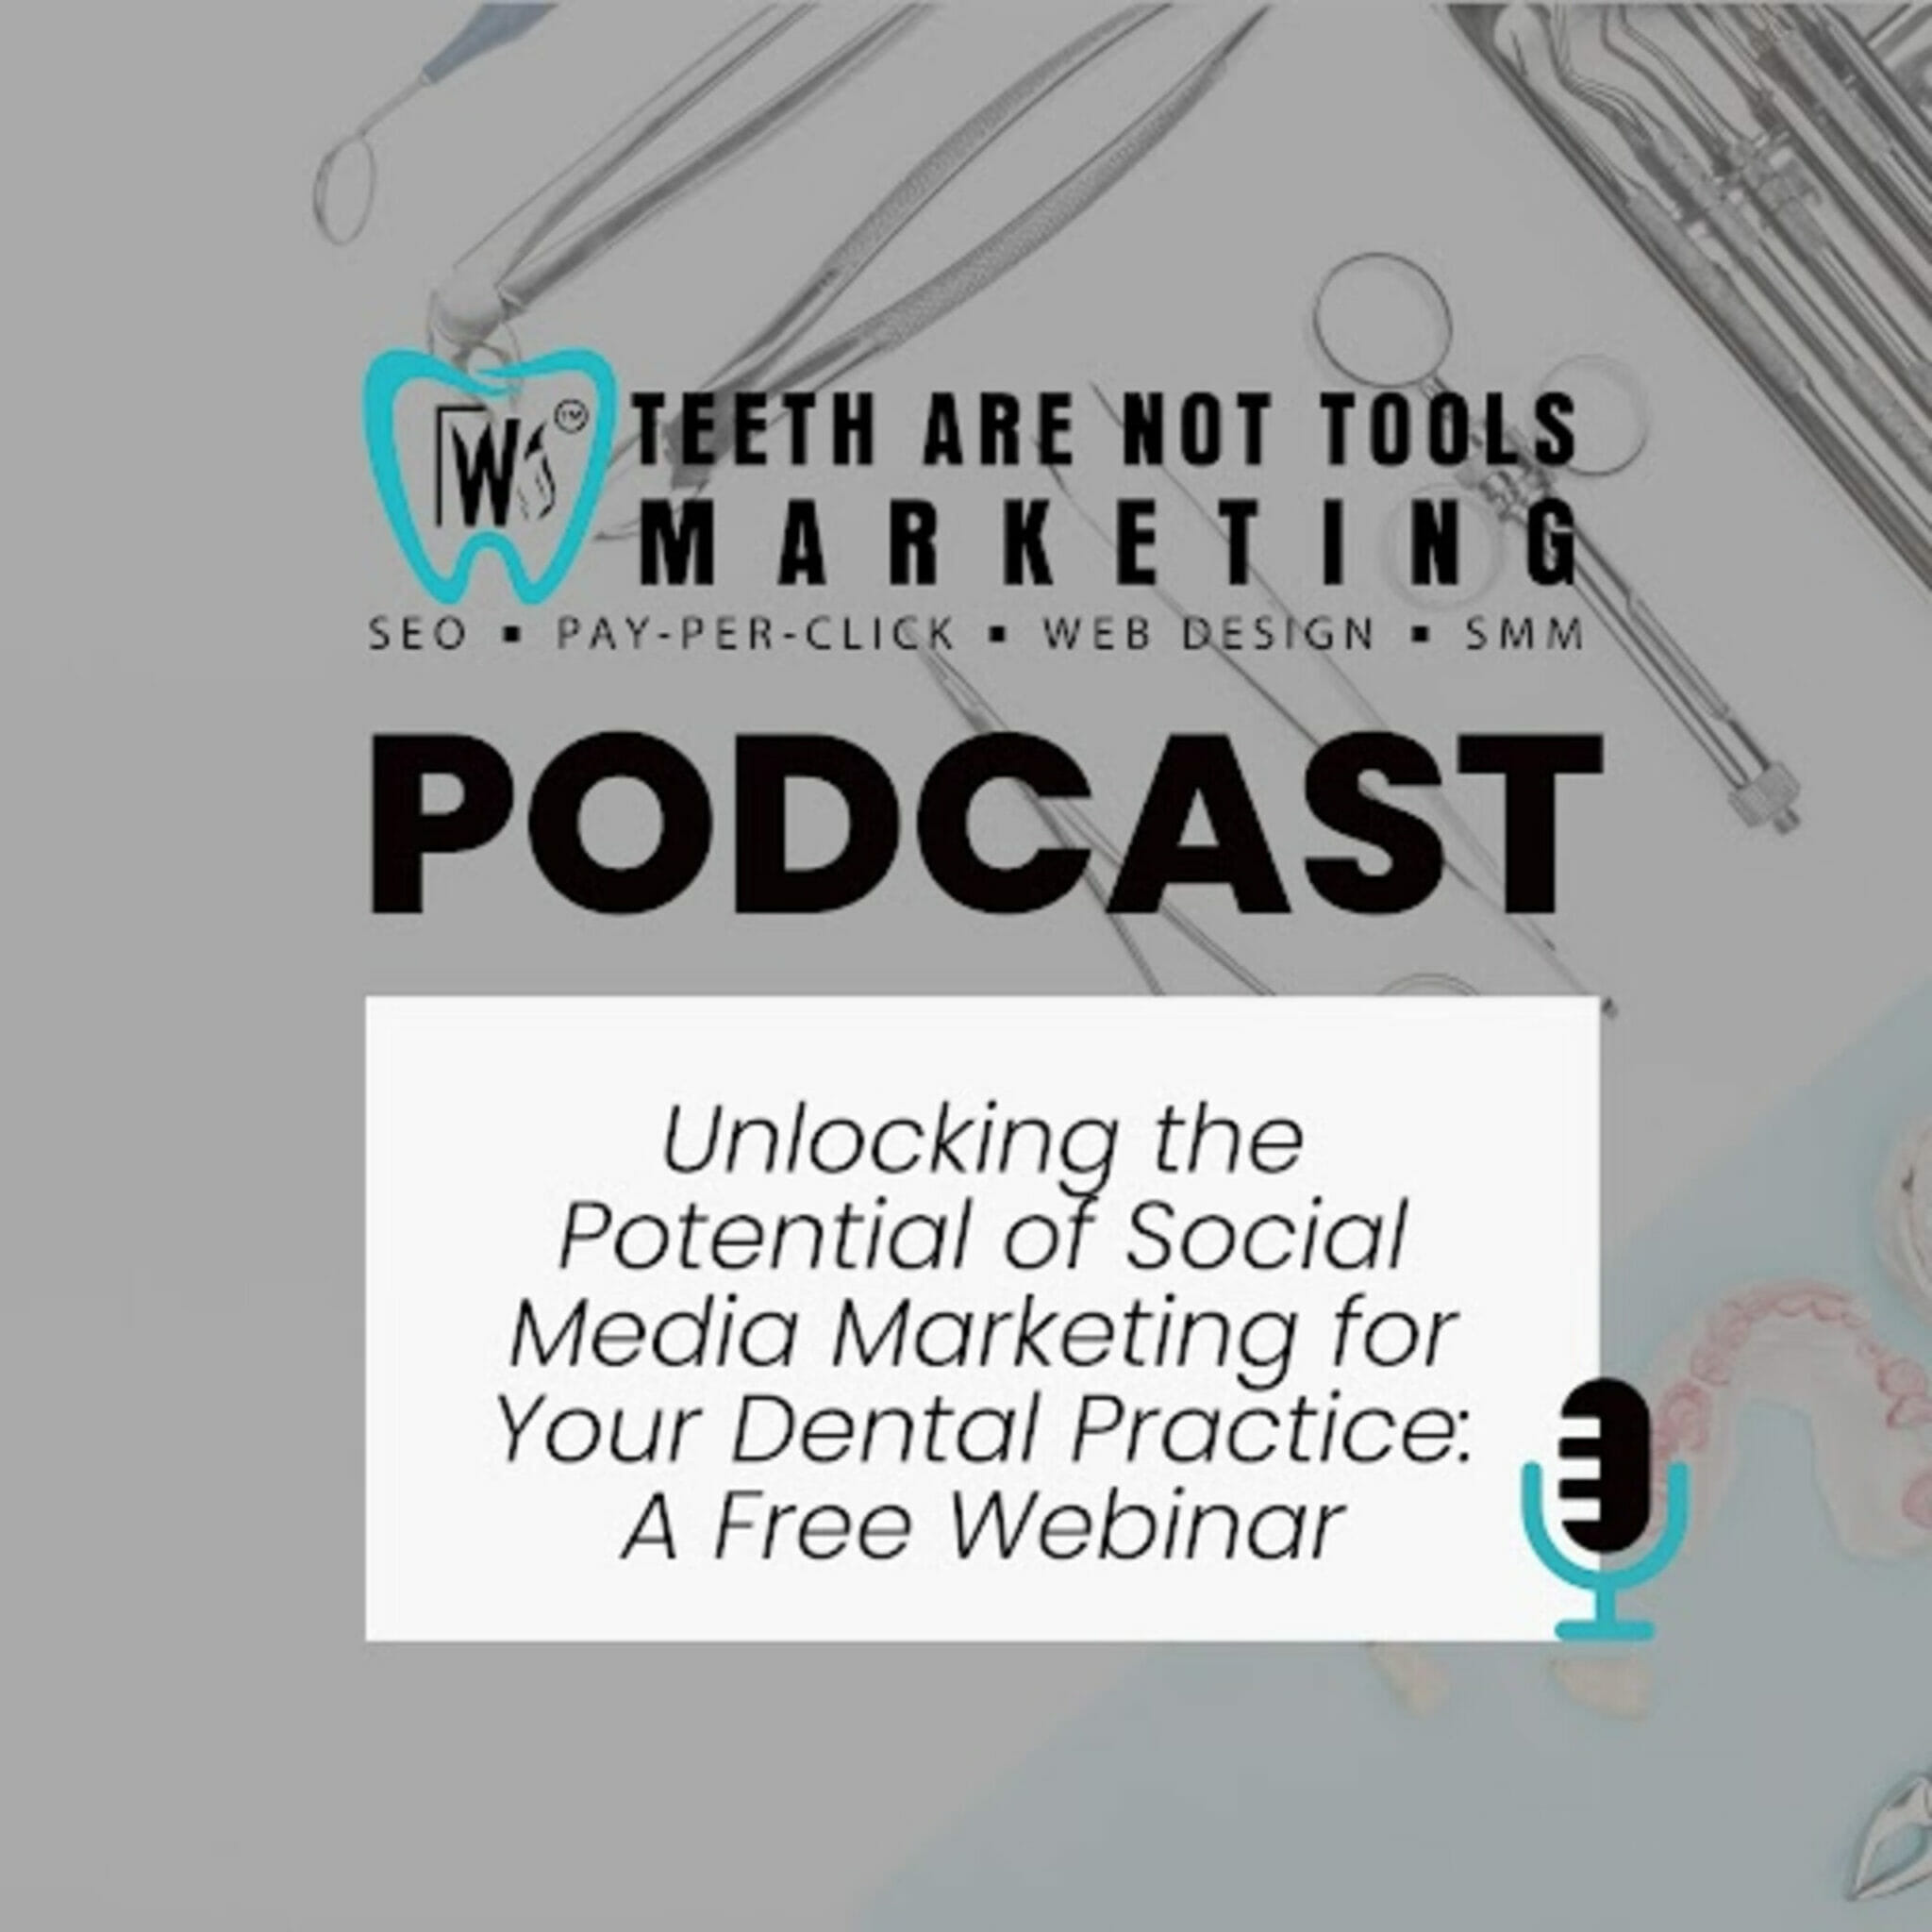 Podcast Title "Maximizing Your Dental Practice"